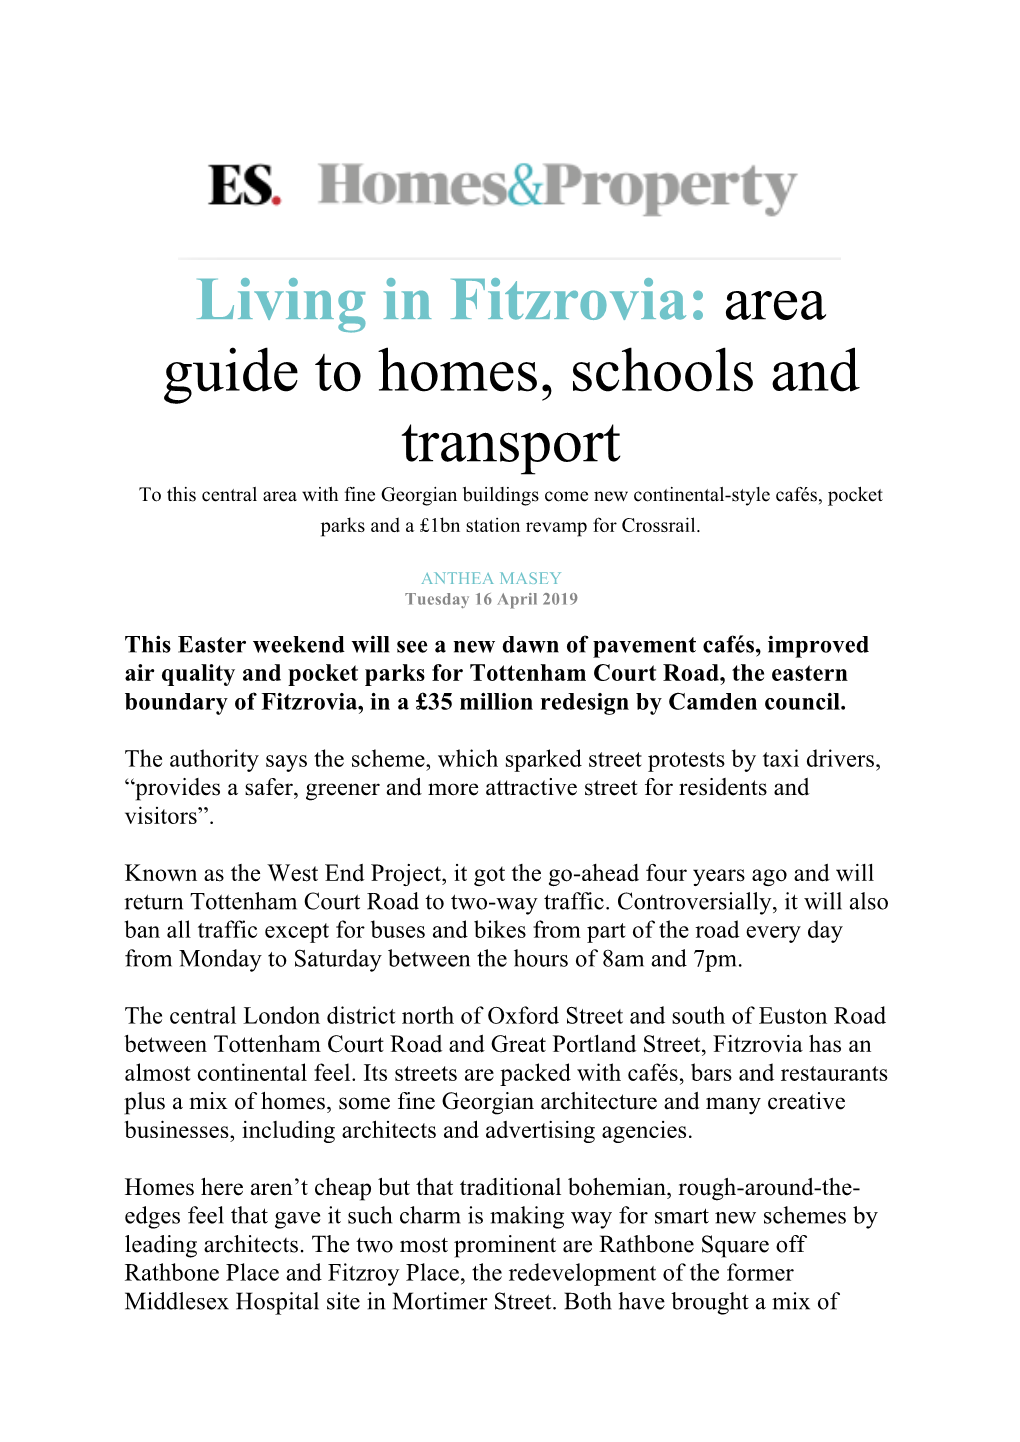 Living in Fitzrovia: Area Guide to Homes, Schools and Transport